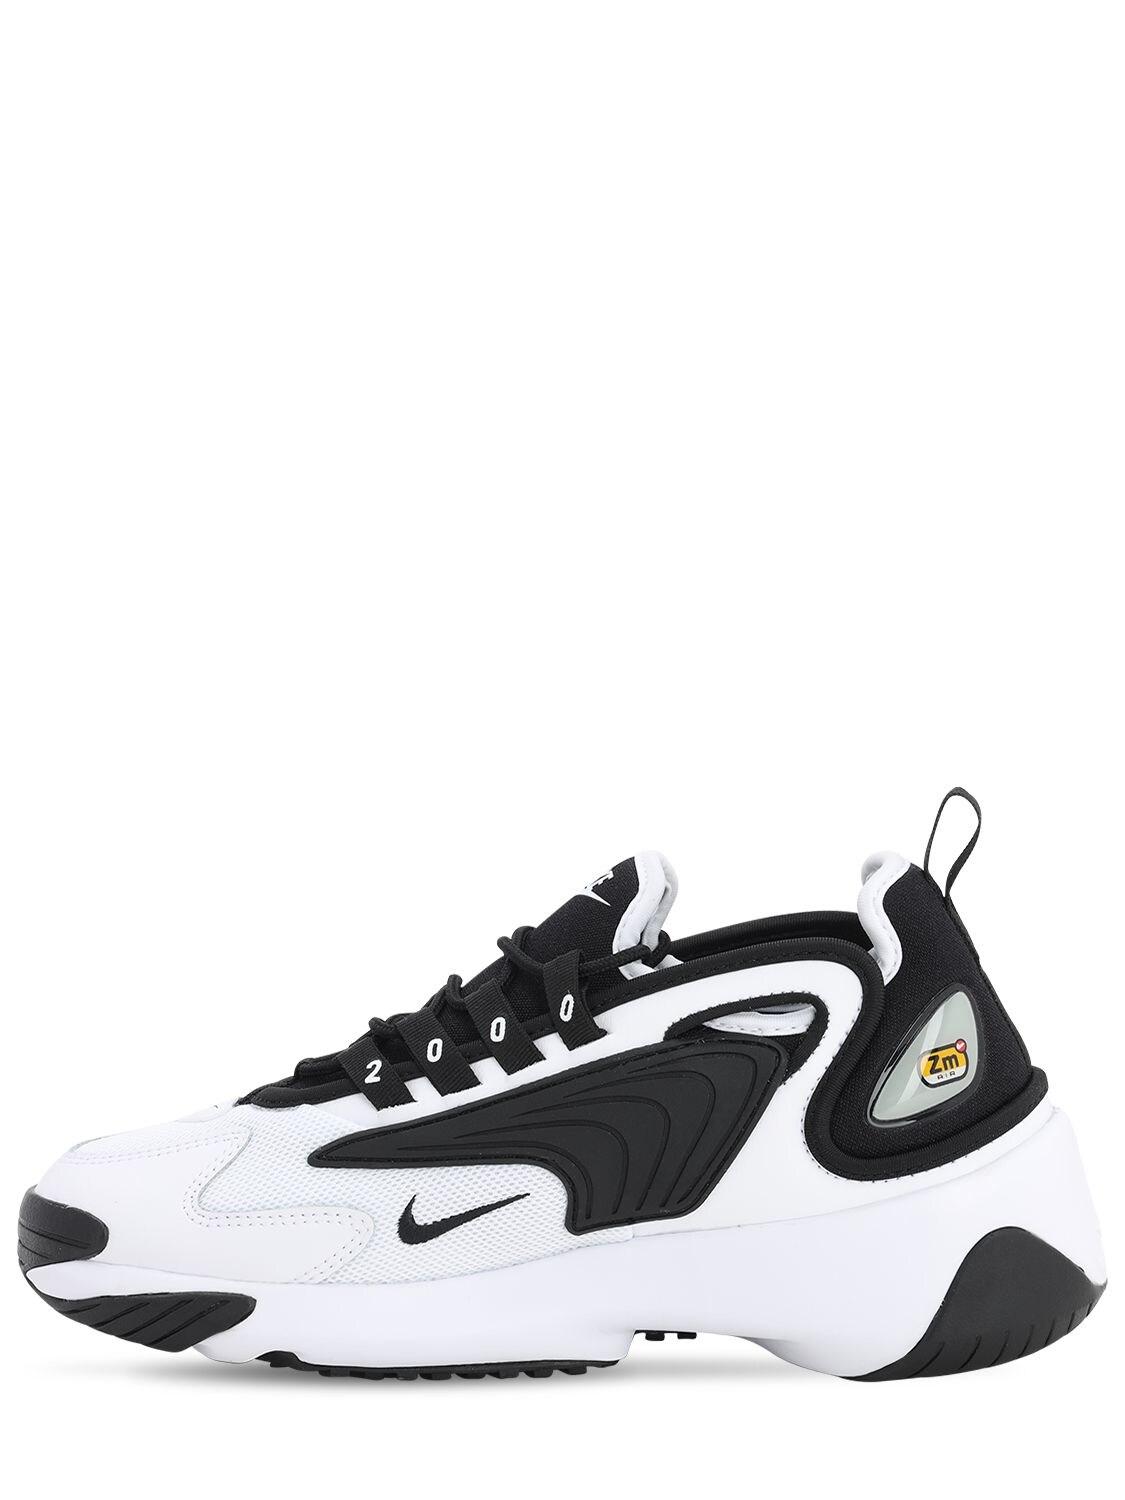 Nike Leather Zoom 2k in White (Black) - Lyst